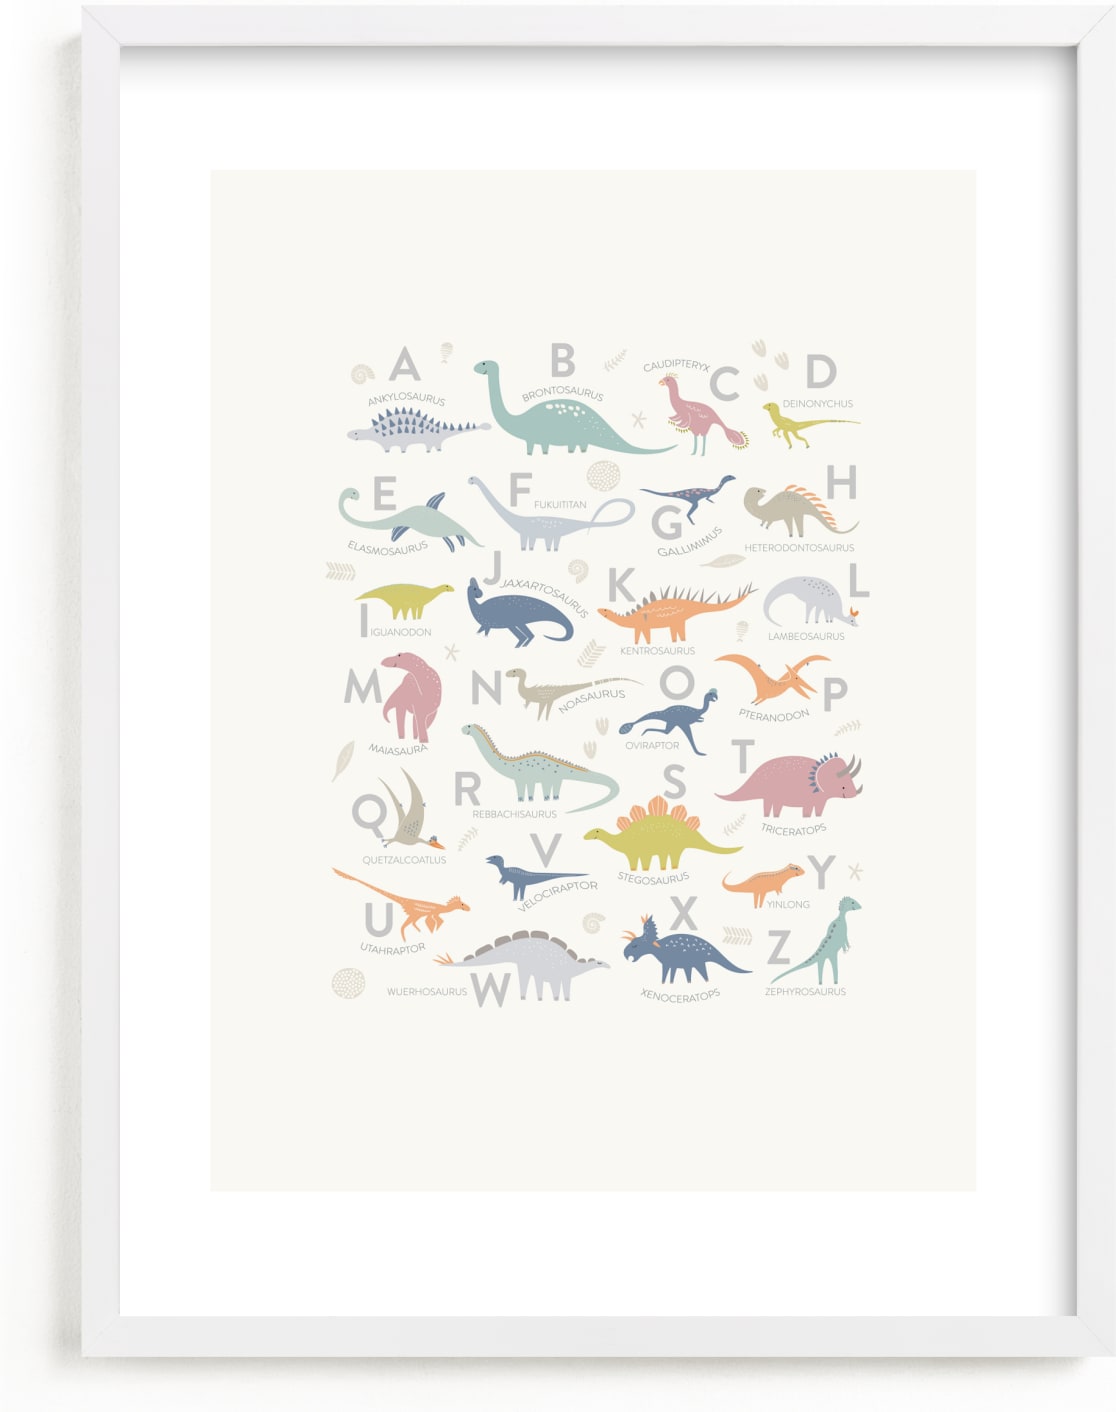 This is a colorful art by Teju Reval called Alphabet Dinos.